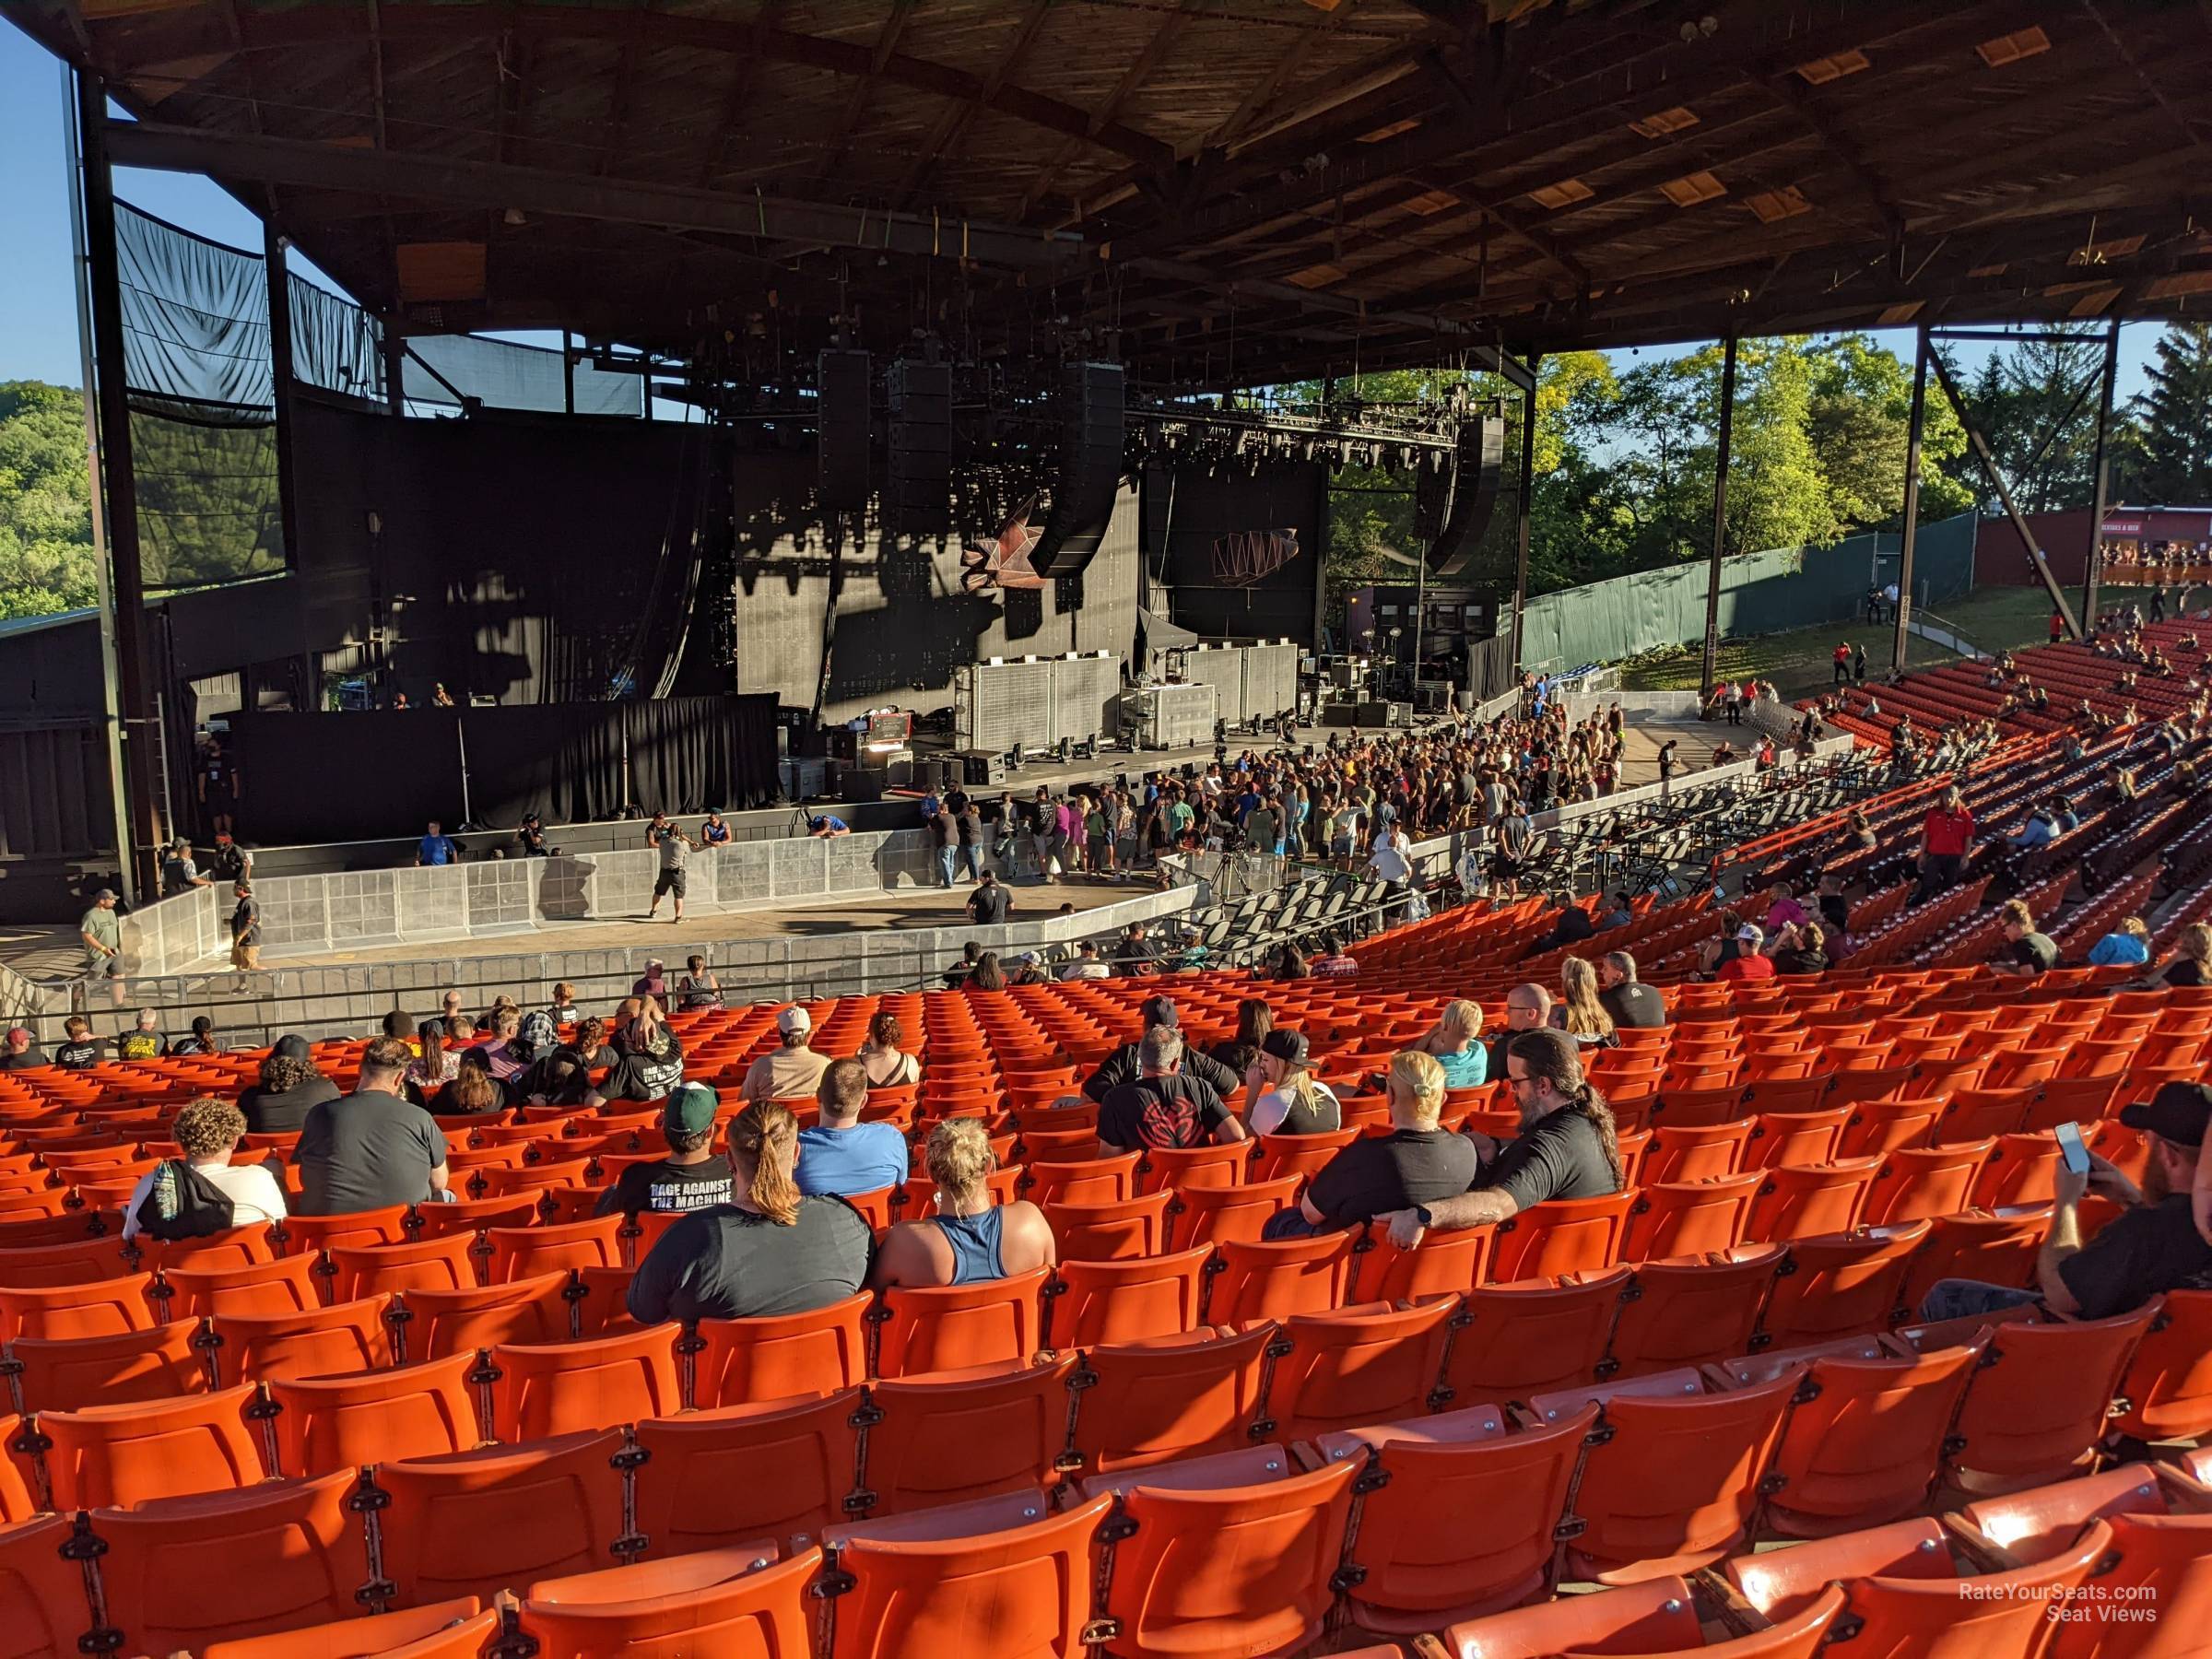 Section 201 at Alpine Valley Music Theatre